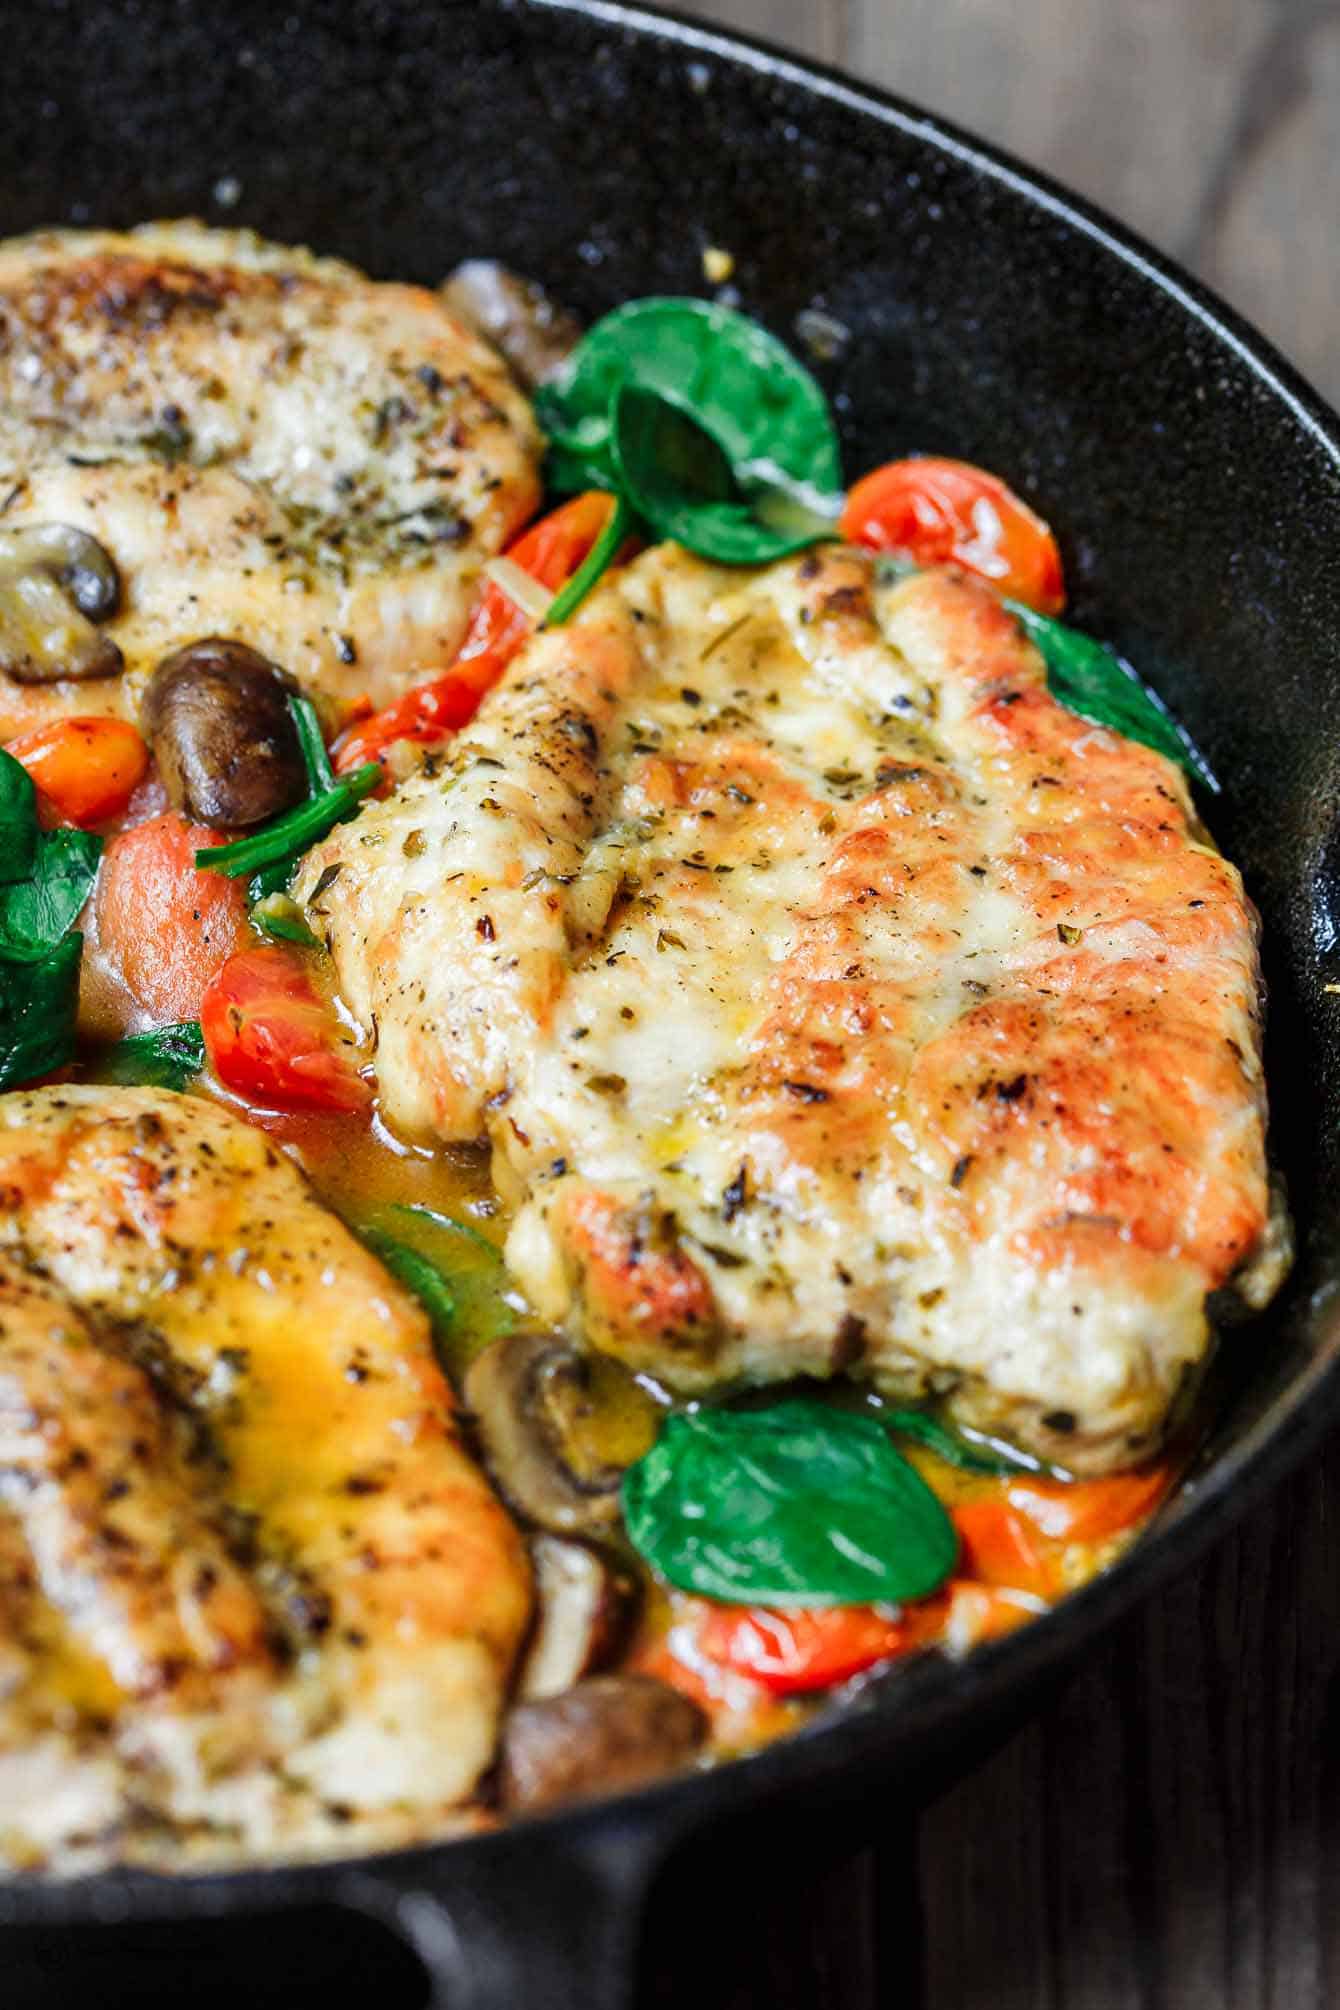 30-Minute Italian Skillet Chicken Recipe with Tomatoes and Mushrooms | The Mediterranean Dish. Flavor packed chicken breasts cooked in white wine with mushrooms, tomatoes and more! The perfect weeknight dinner in minutes! See the recipe on TheMediterraneanDish.com